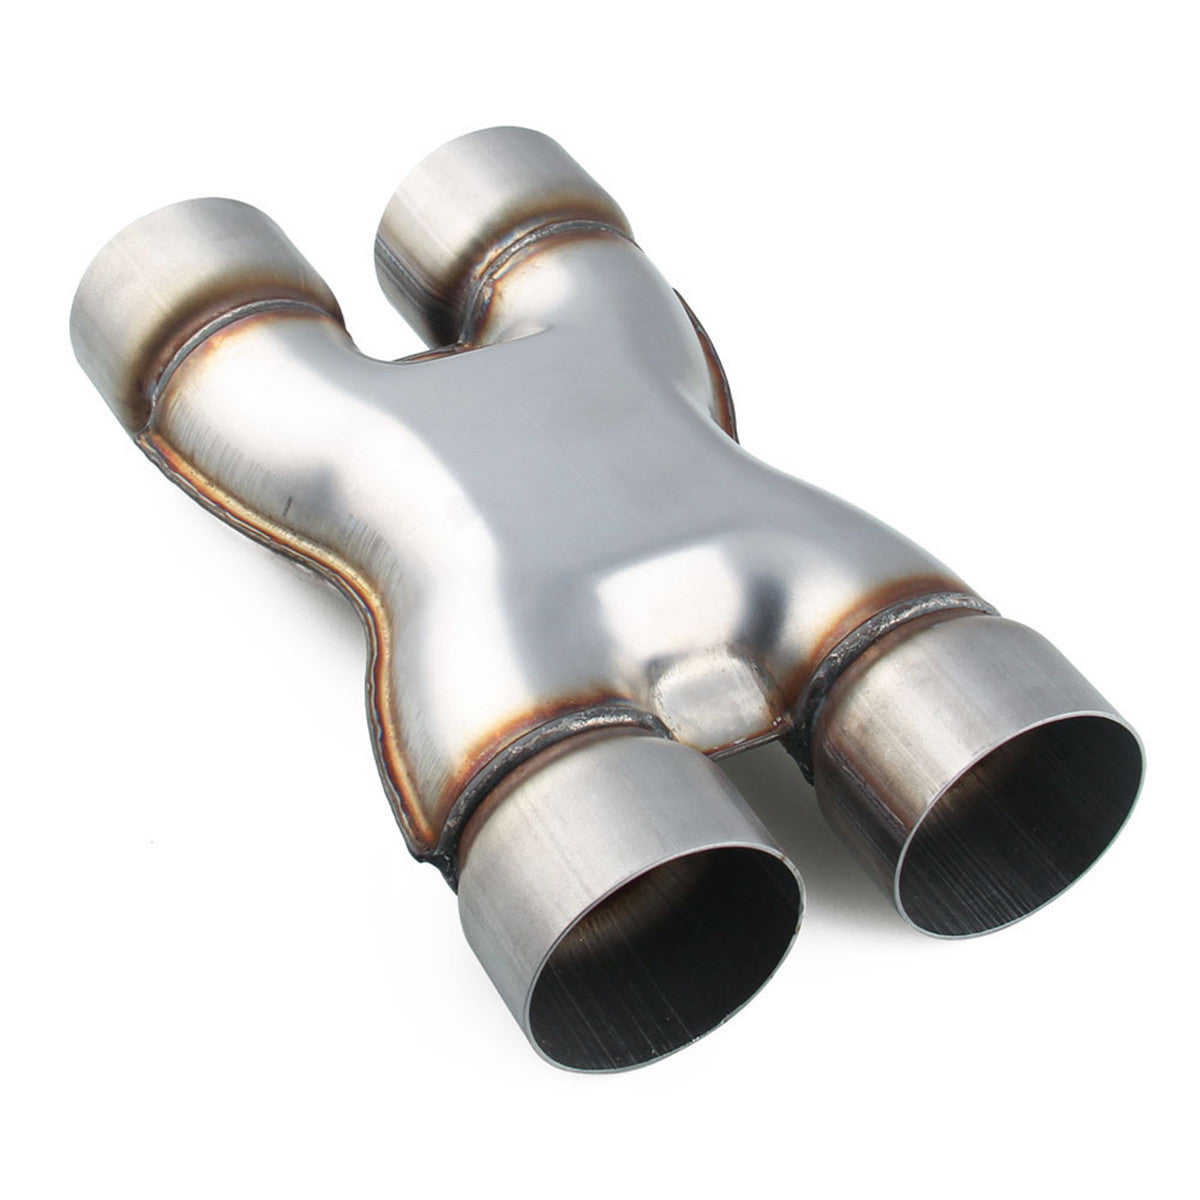 SXP6 Mild Steel Exhaust X Pipe Adapter Connector 3 inch Dual to 3 inch Dual Silver - Auto GoShop